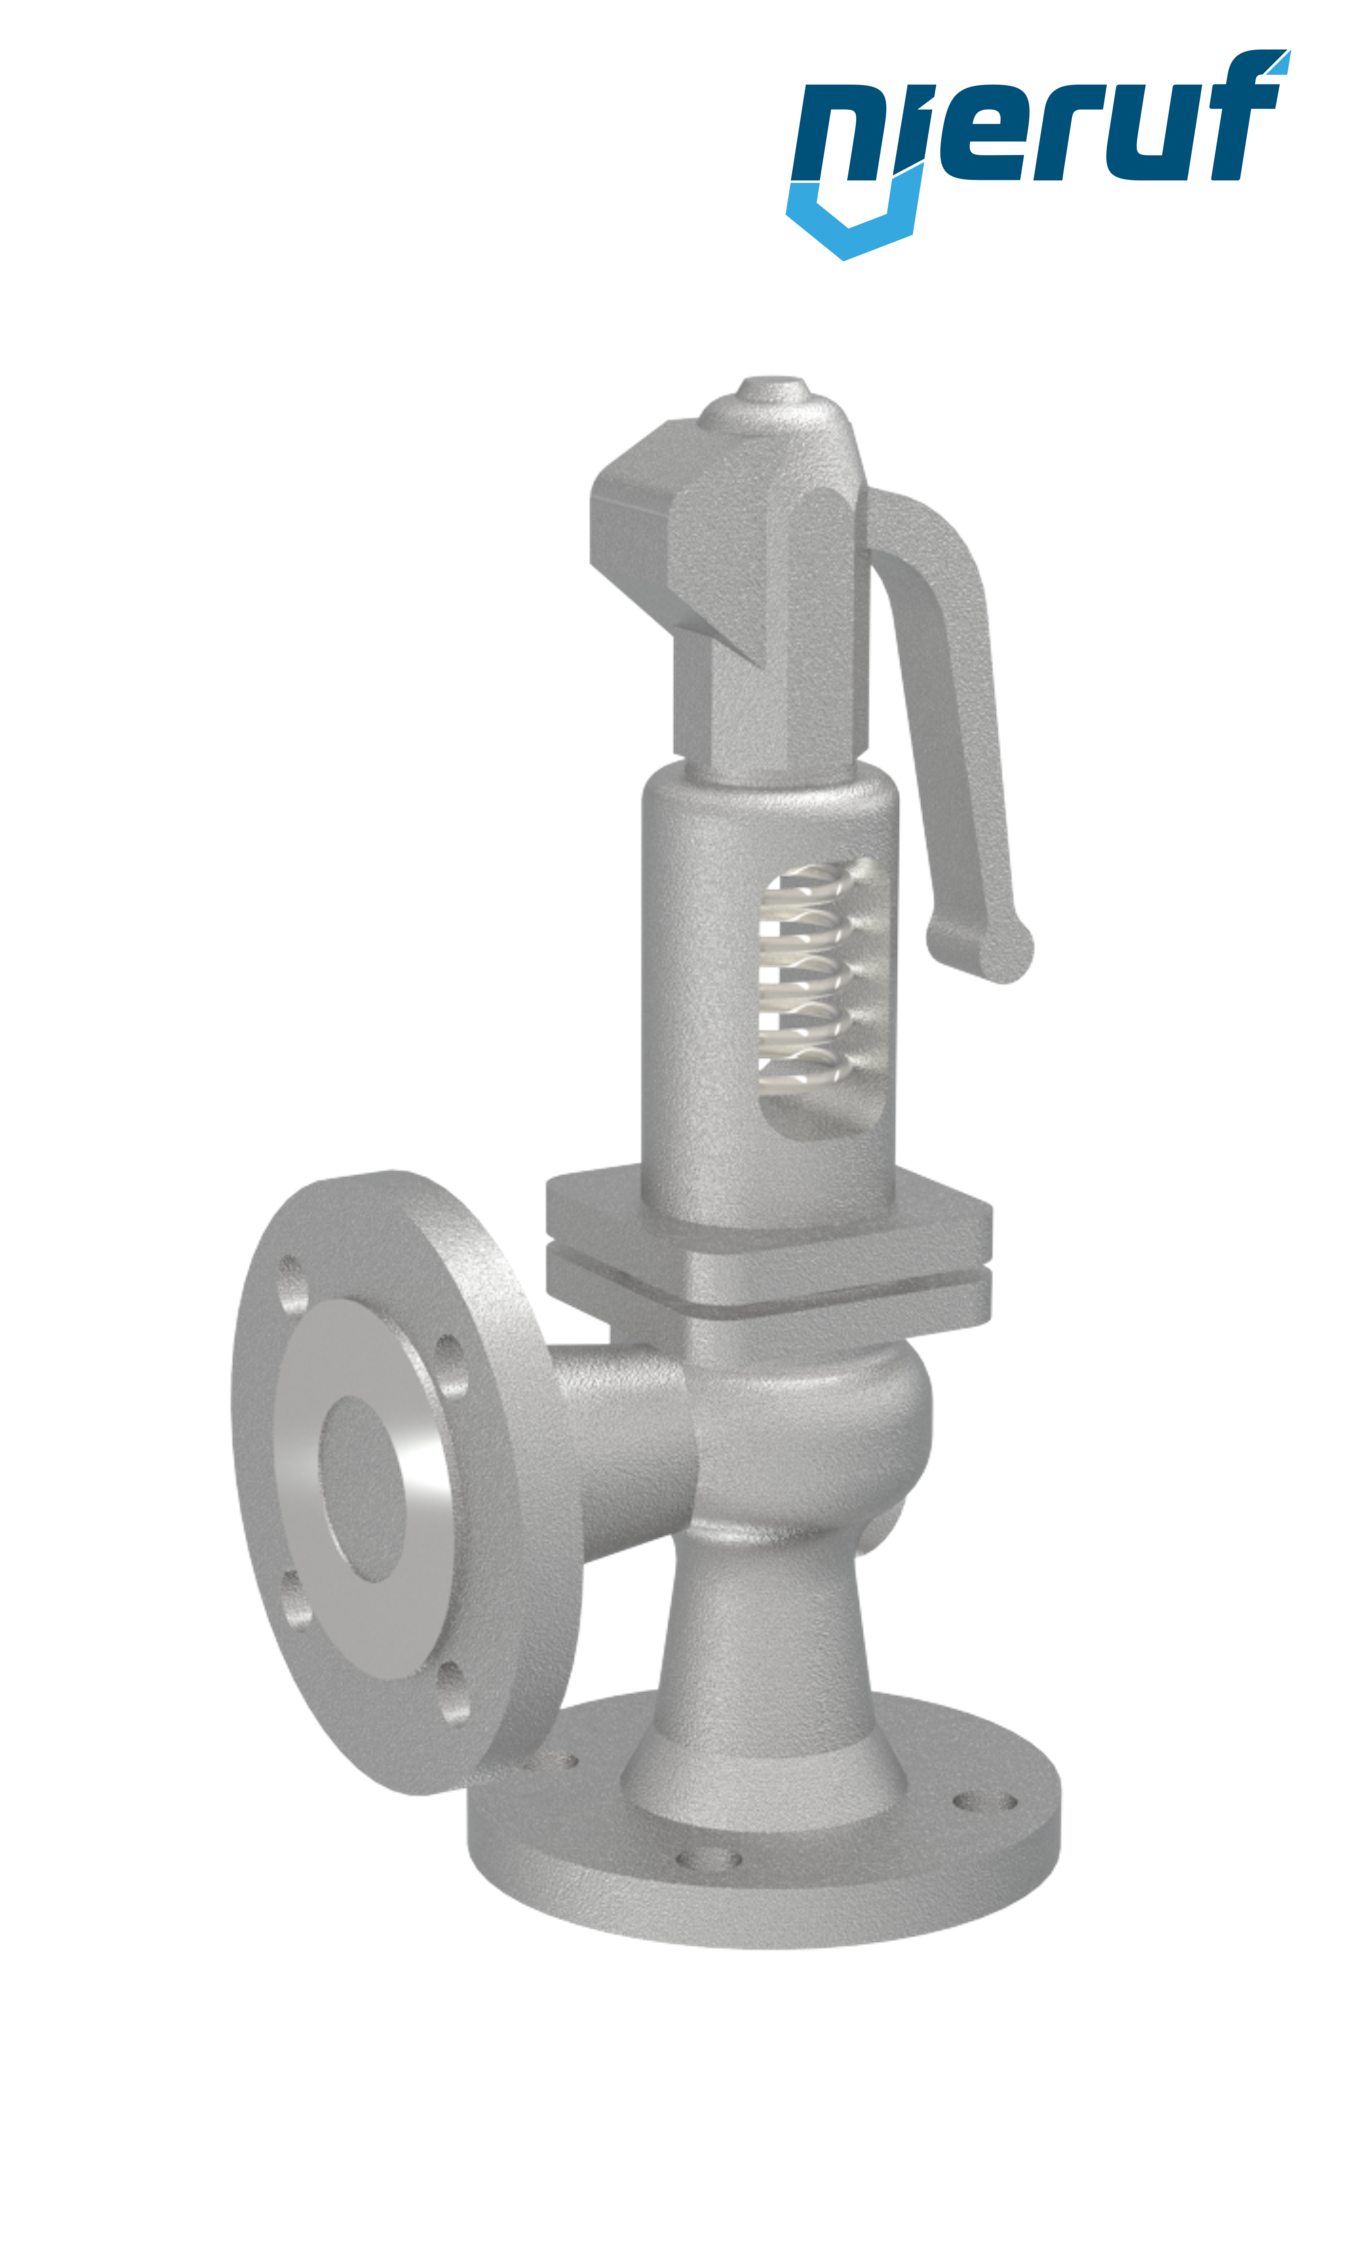 flange-safety valve DN40/DN40 SF0202, cast steel metal, with lever